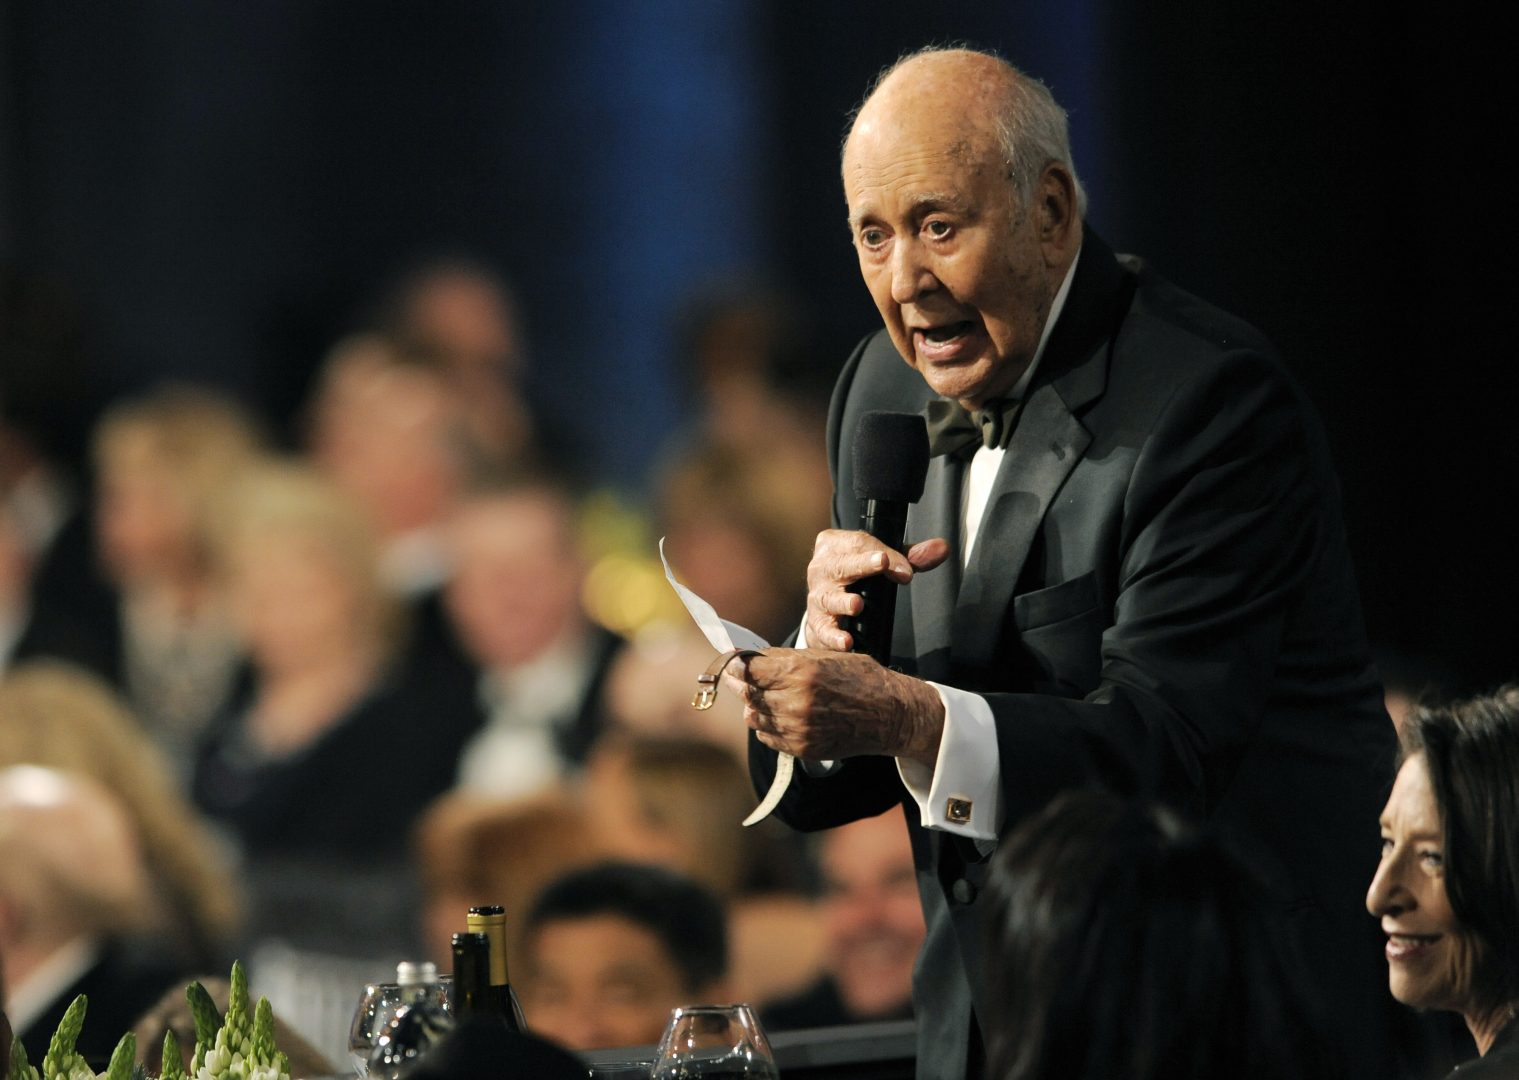 Carl Reiner performs a testimonial to honoree Mel Brooks at the American Film Institute's 41st Lifetime Achievement Award Gala at the Dolby Theatre on Thursday, June 6, 2013 in Los Angeles. 